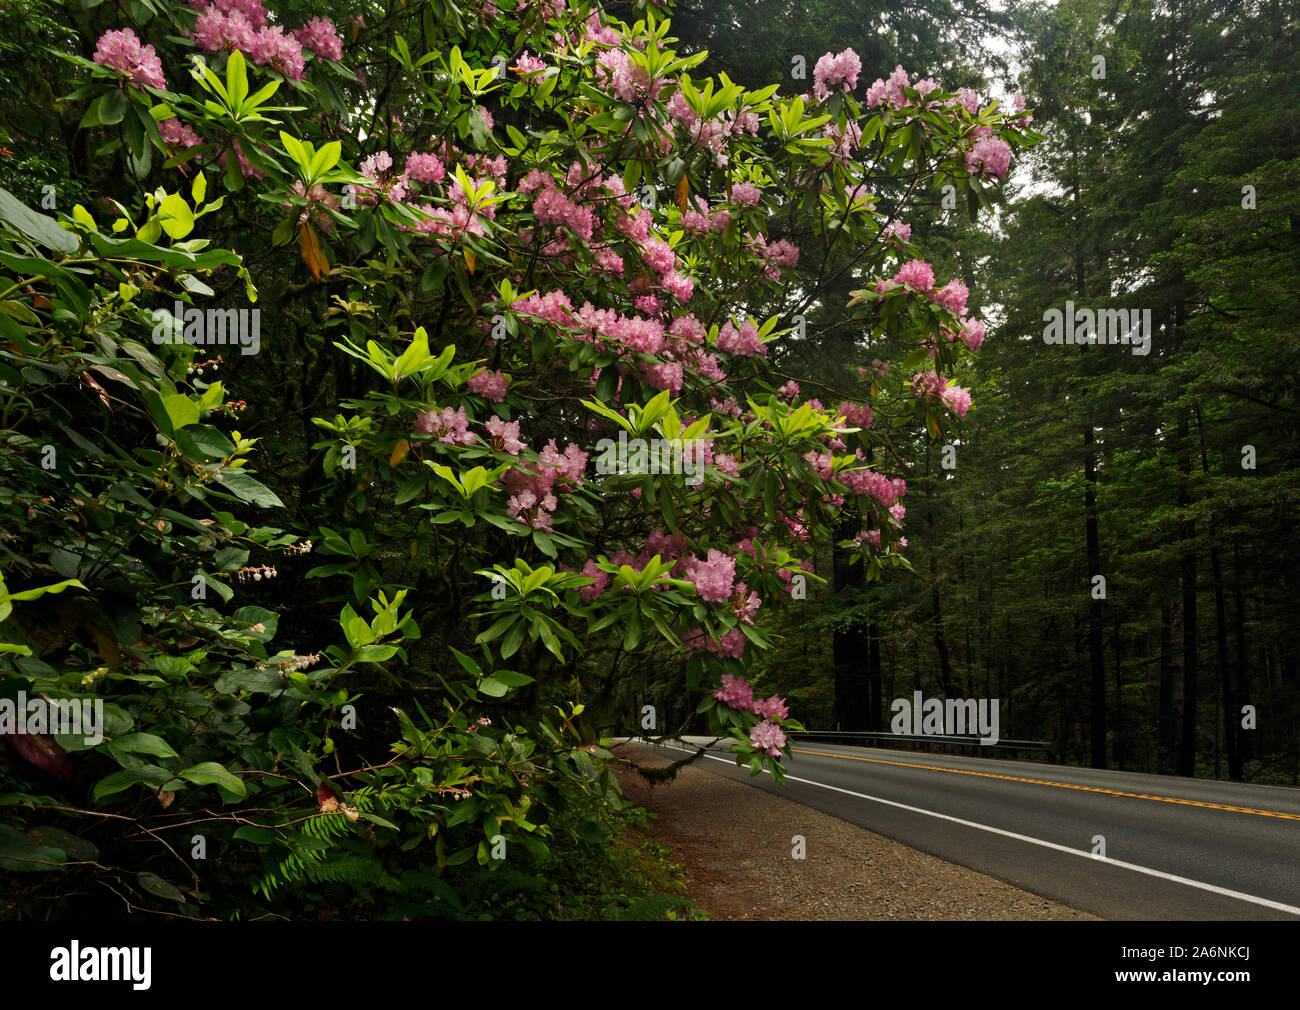 CA03808-00...CALIFORNIA - Native rhododendron in full bloom along Highway 199 in Jedediah Smith Redwoods State Park; part of the Redwoods National and Stock Photo